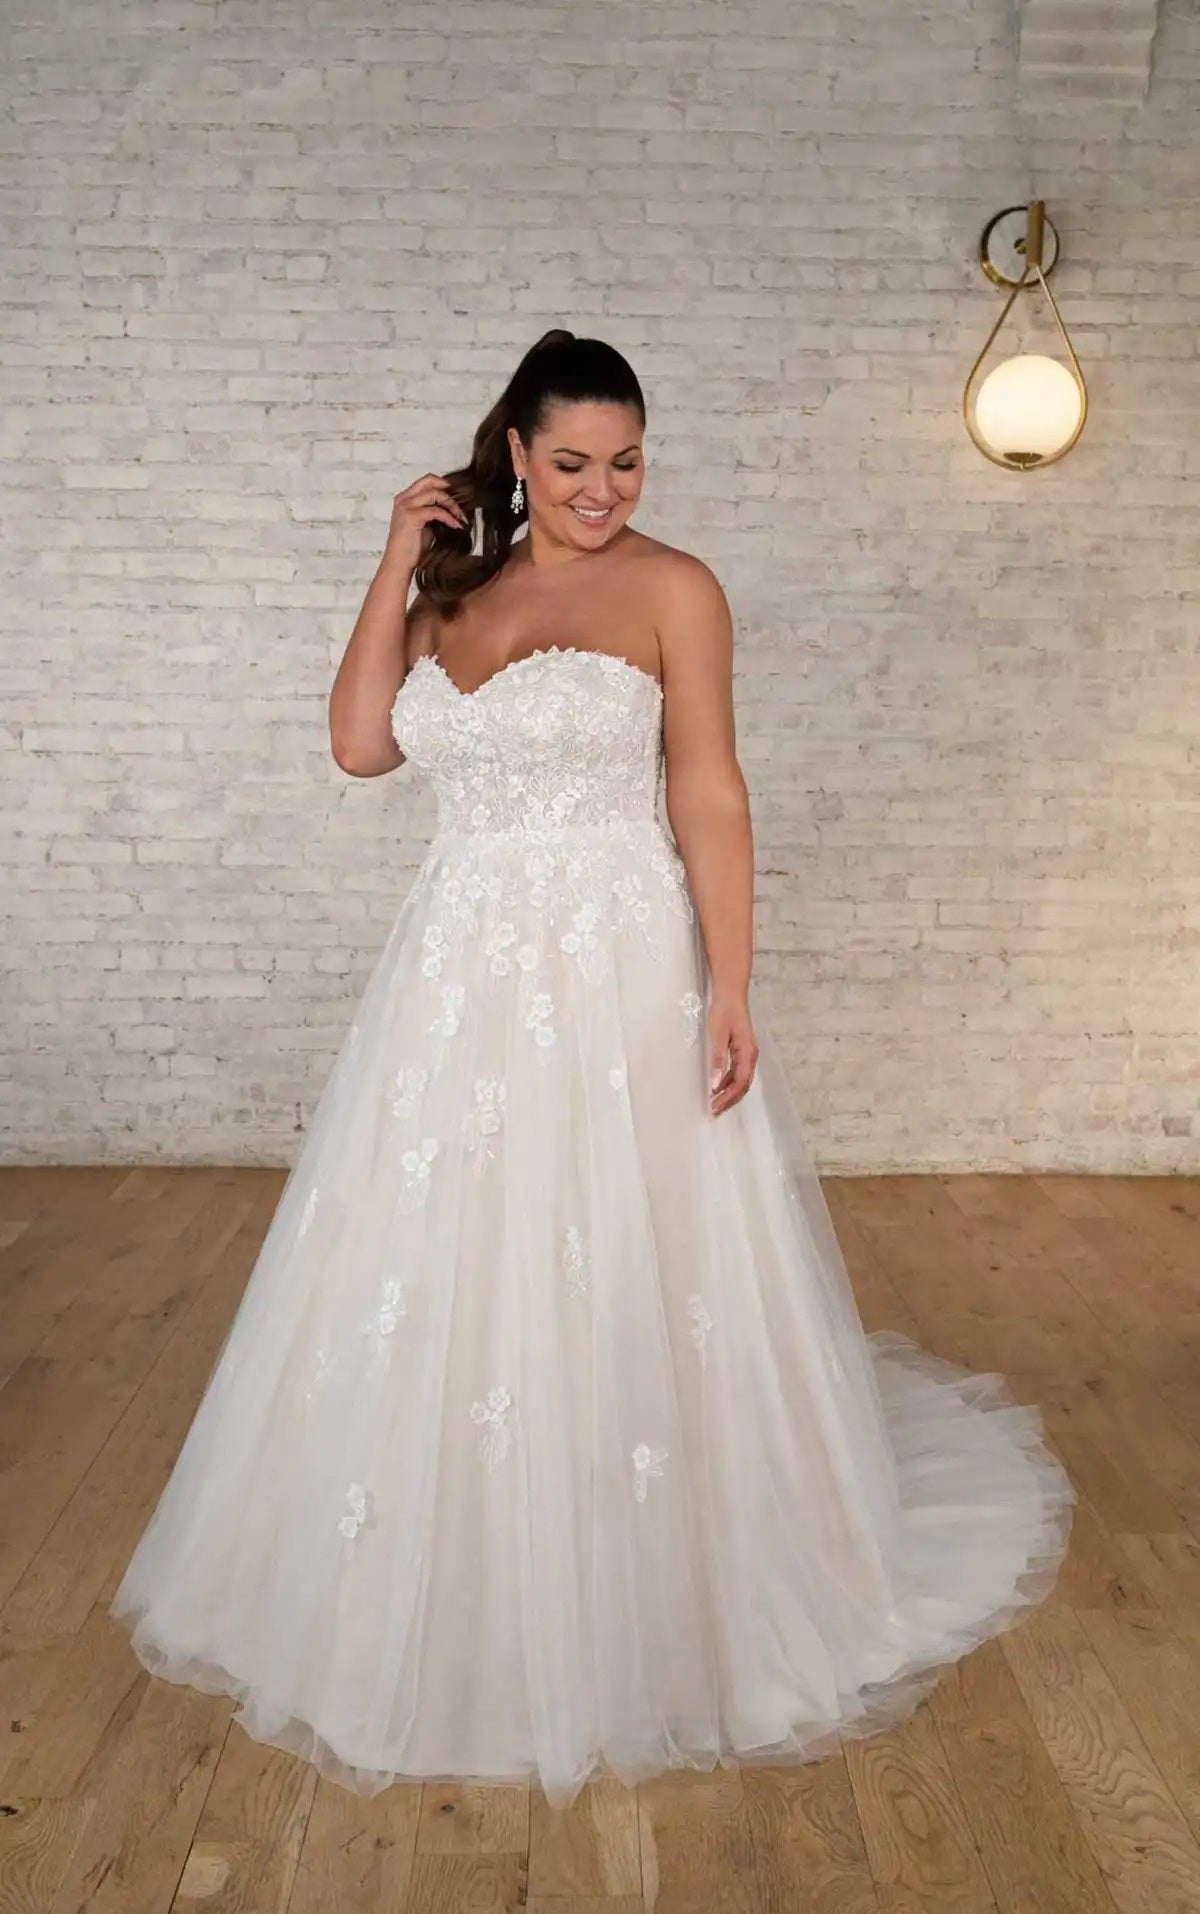 Curvy Brides, Sizes 16 & Up — Heart to Heart Bride